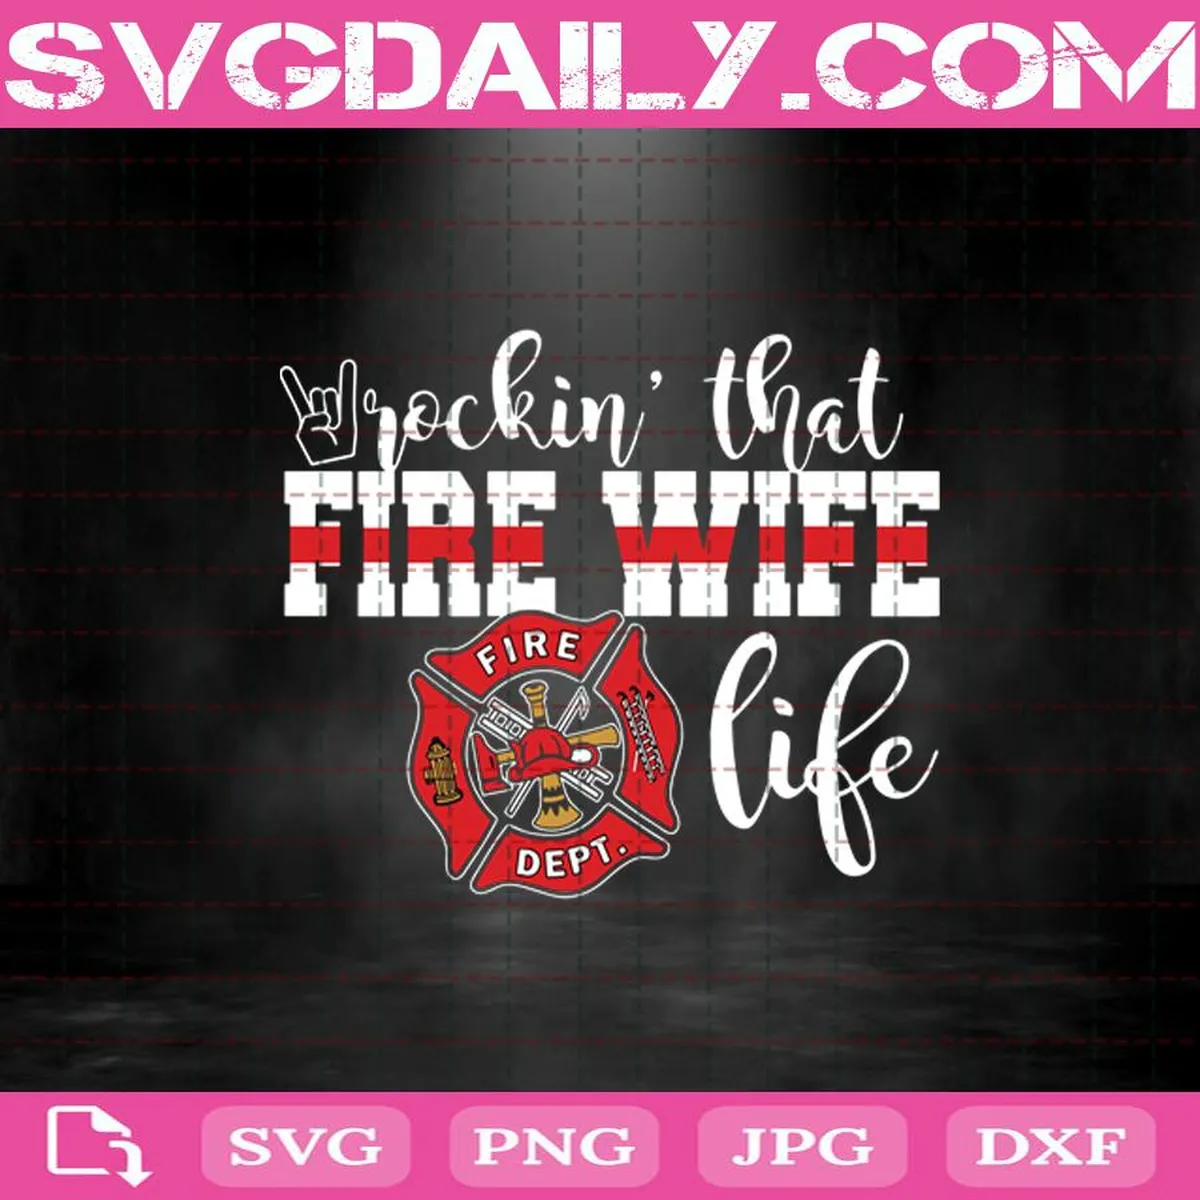 Rockin That Fire Wife Life Firefighter Svg, Wife Firefighter Svg, Life Firefighter Svg, Firefighter Svg, Heart Firefighter Svg